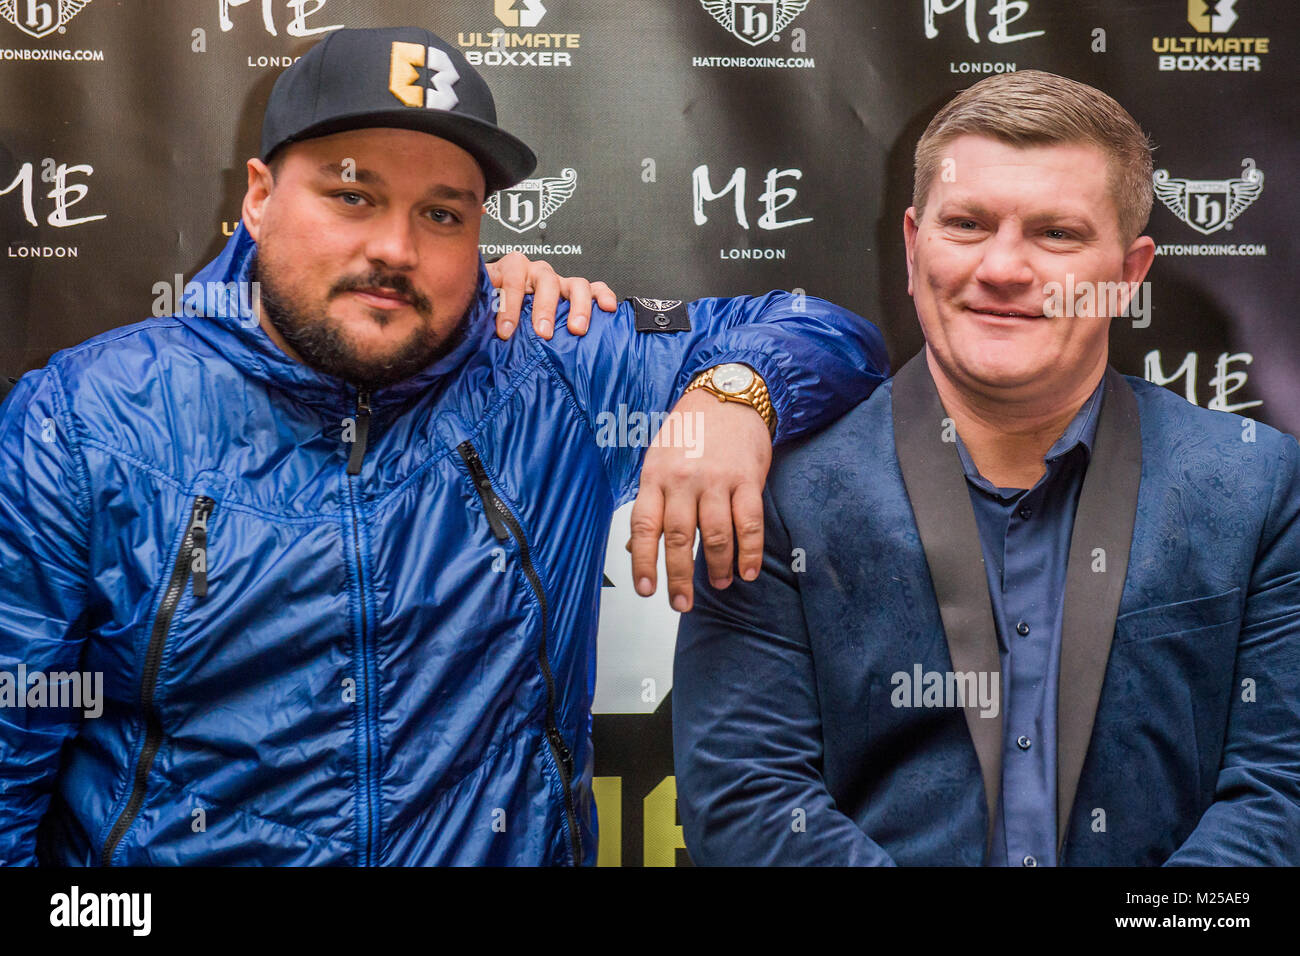 London, UK. 5th February, 2018. DJ Charlie Sloth with Ricky Hatton - The official launch of ULTIMATE BOXER, Britain’s first Boxing Entertainment brand, at ME London Hotel. The single elimination format, approved by the British Boxing Board of Control, will give young untapped talented British professional-boxers life changing career opportunities, with large cash prizes on offer for the tournament champion. Credit: Guy Bell/Alamy Live News Stock Photo